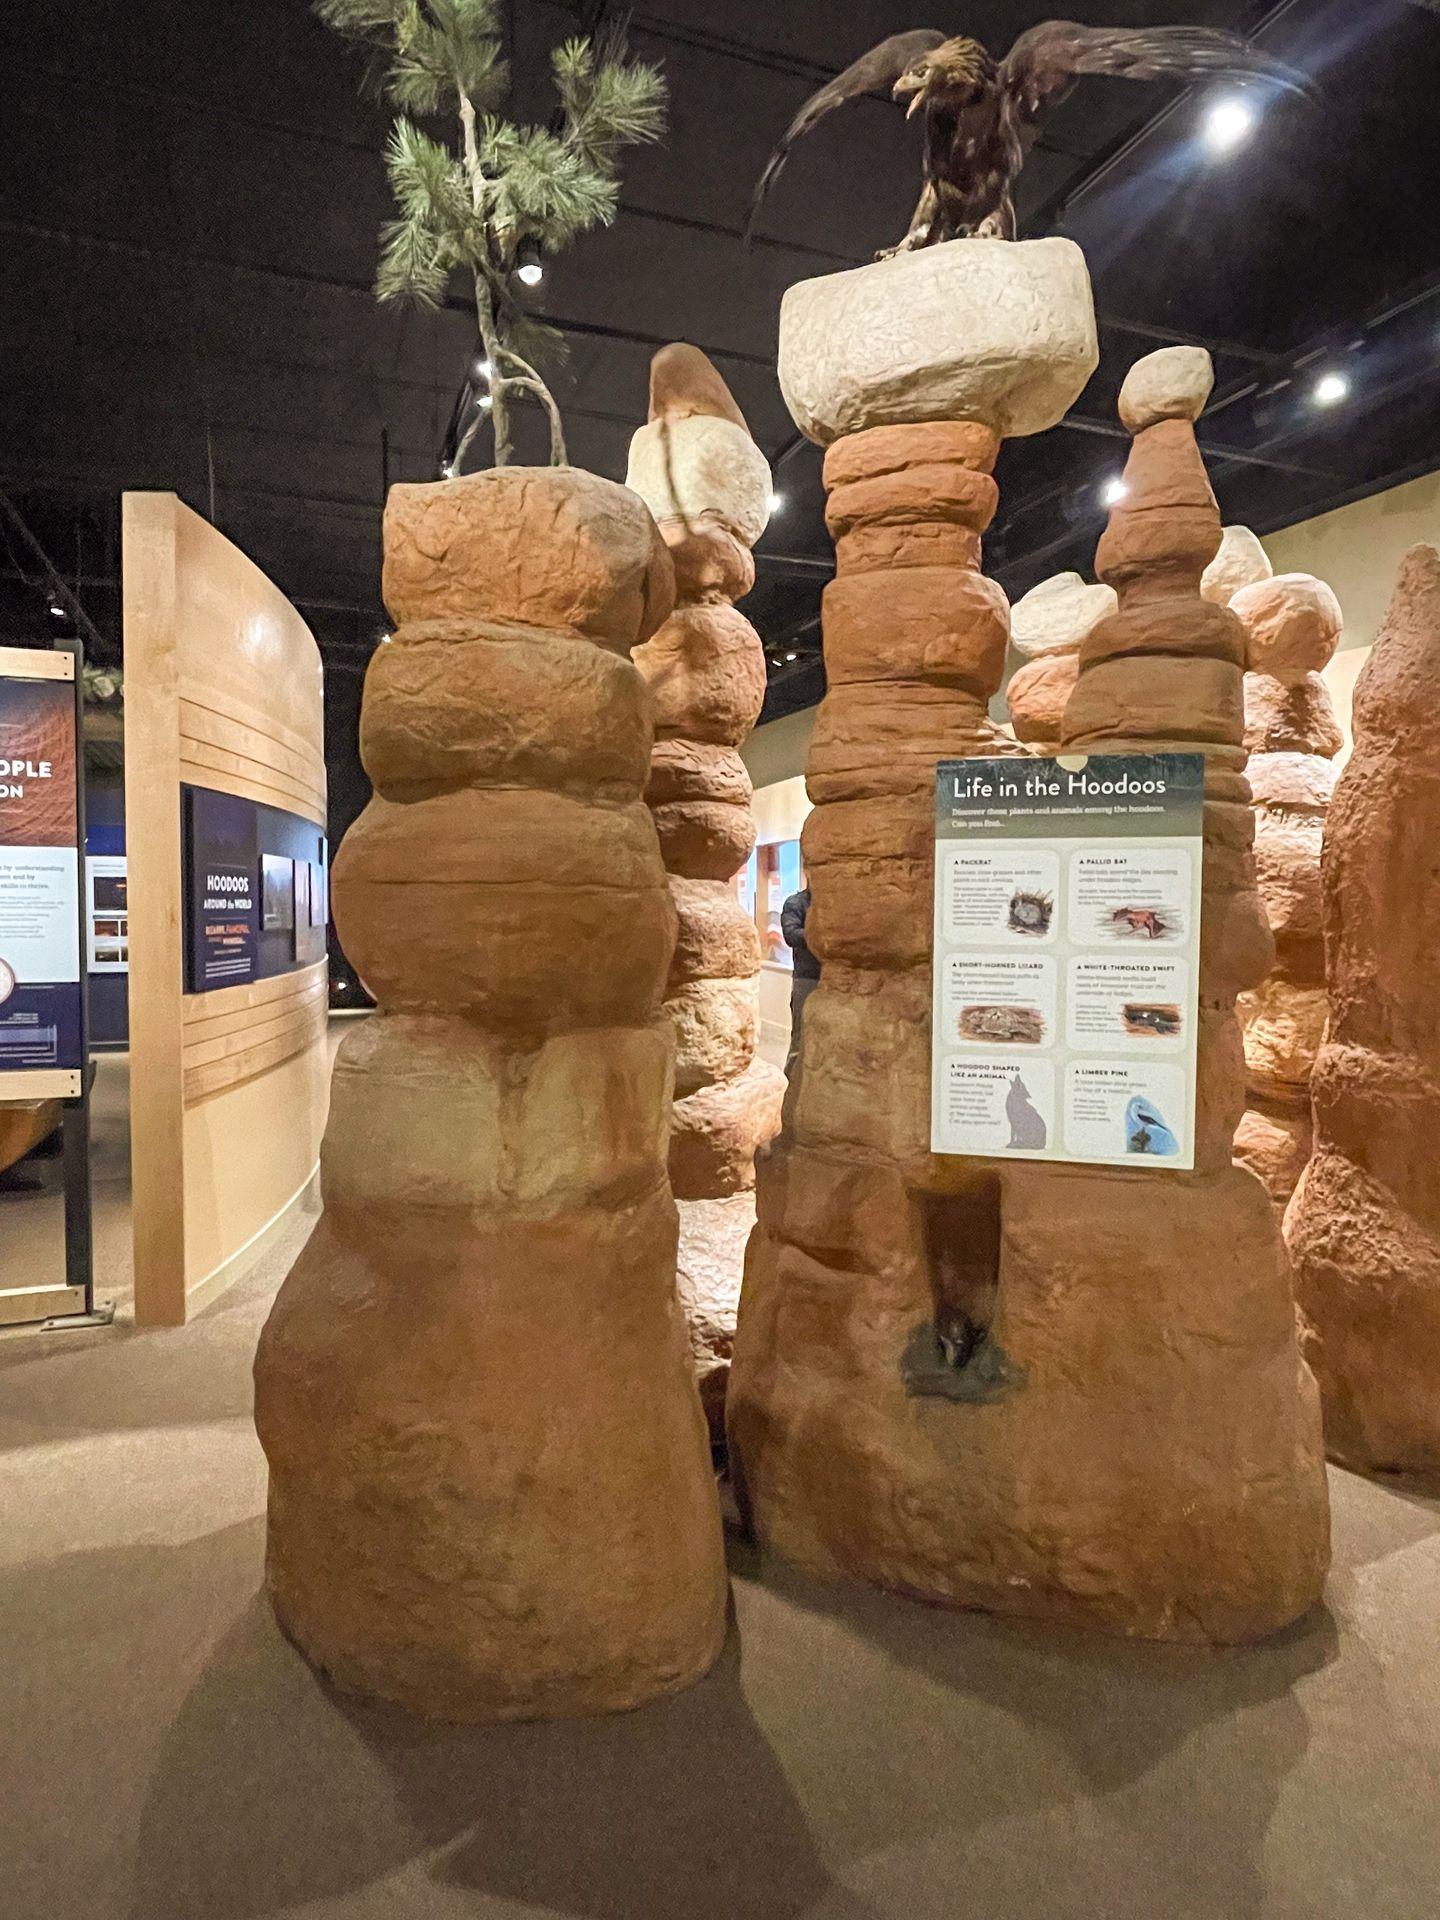 A display of large hoodoos with a sign that reads 'Life in the Hoodoos' in the Bryce Canyon Visitor Center